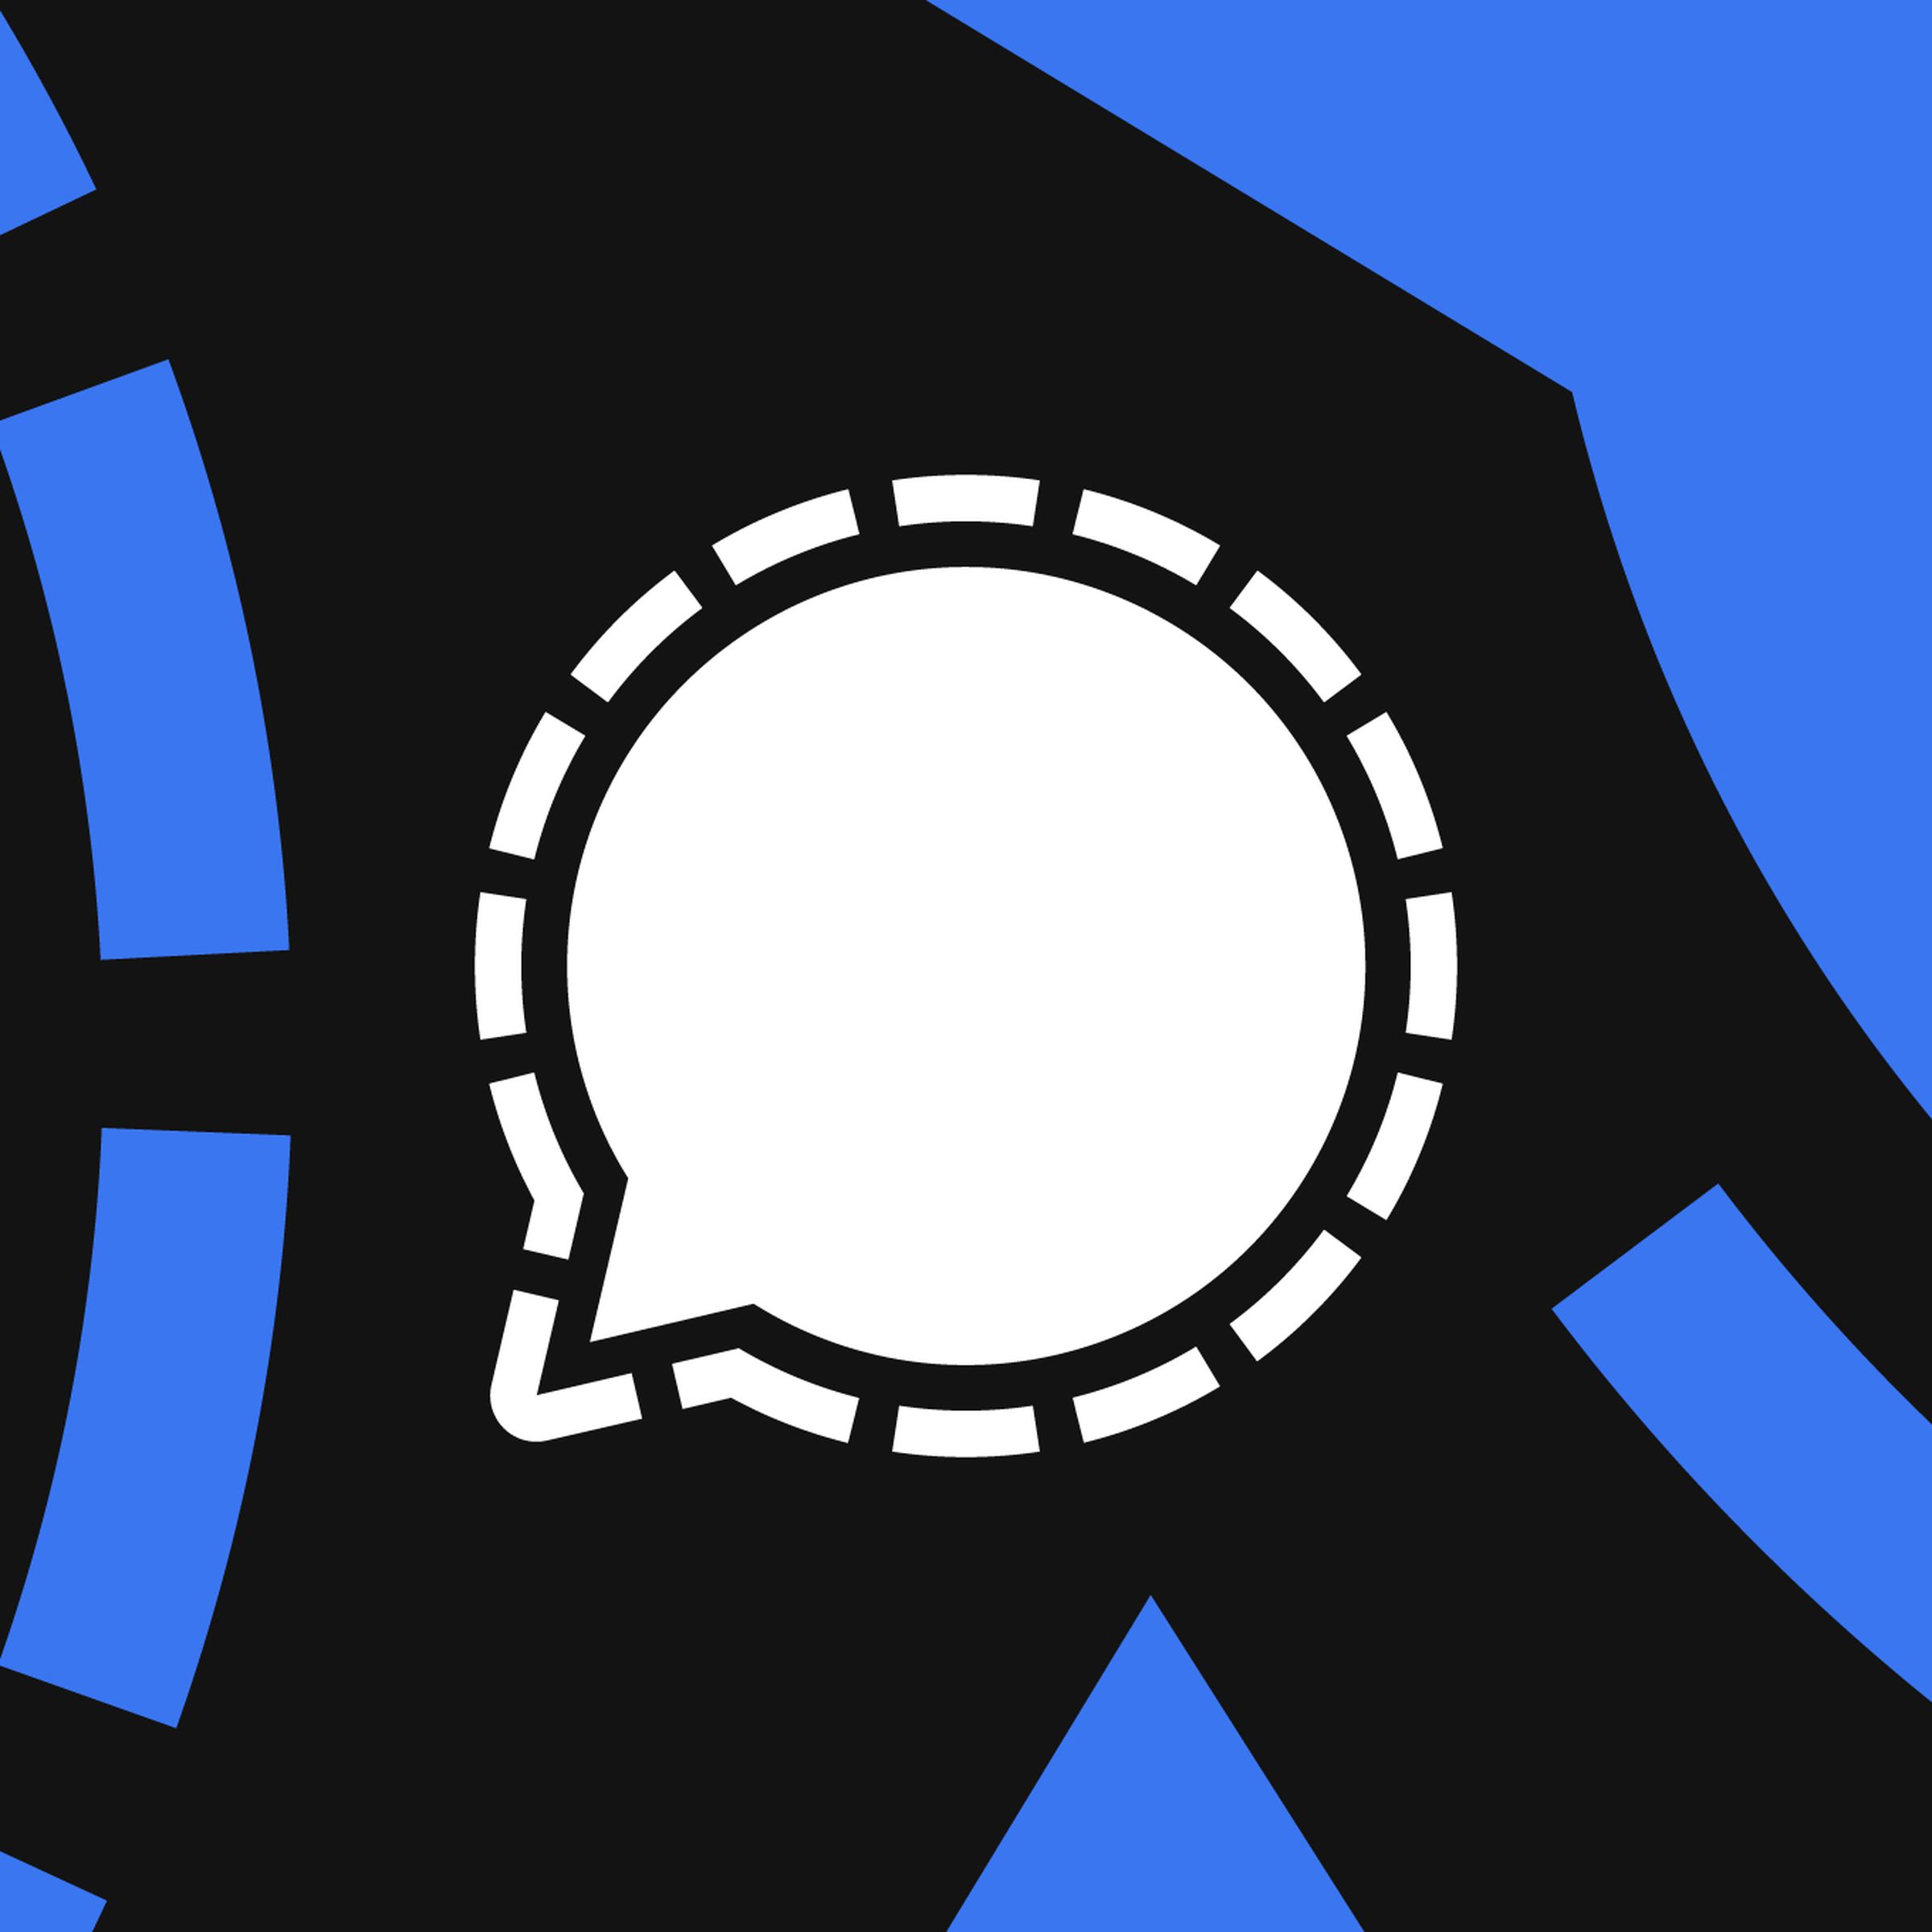 Illustration of the Signal logo: a white speech balloon with a dotted outline on a black and blue background.